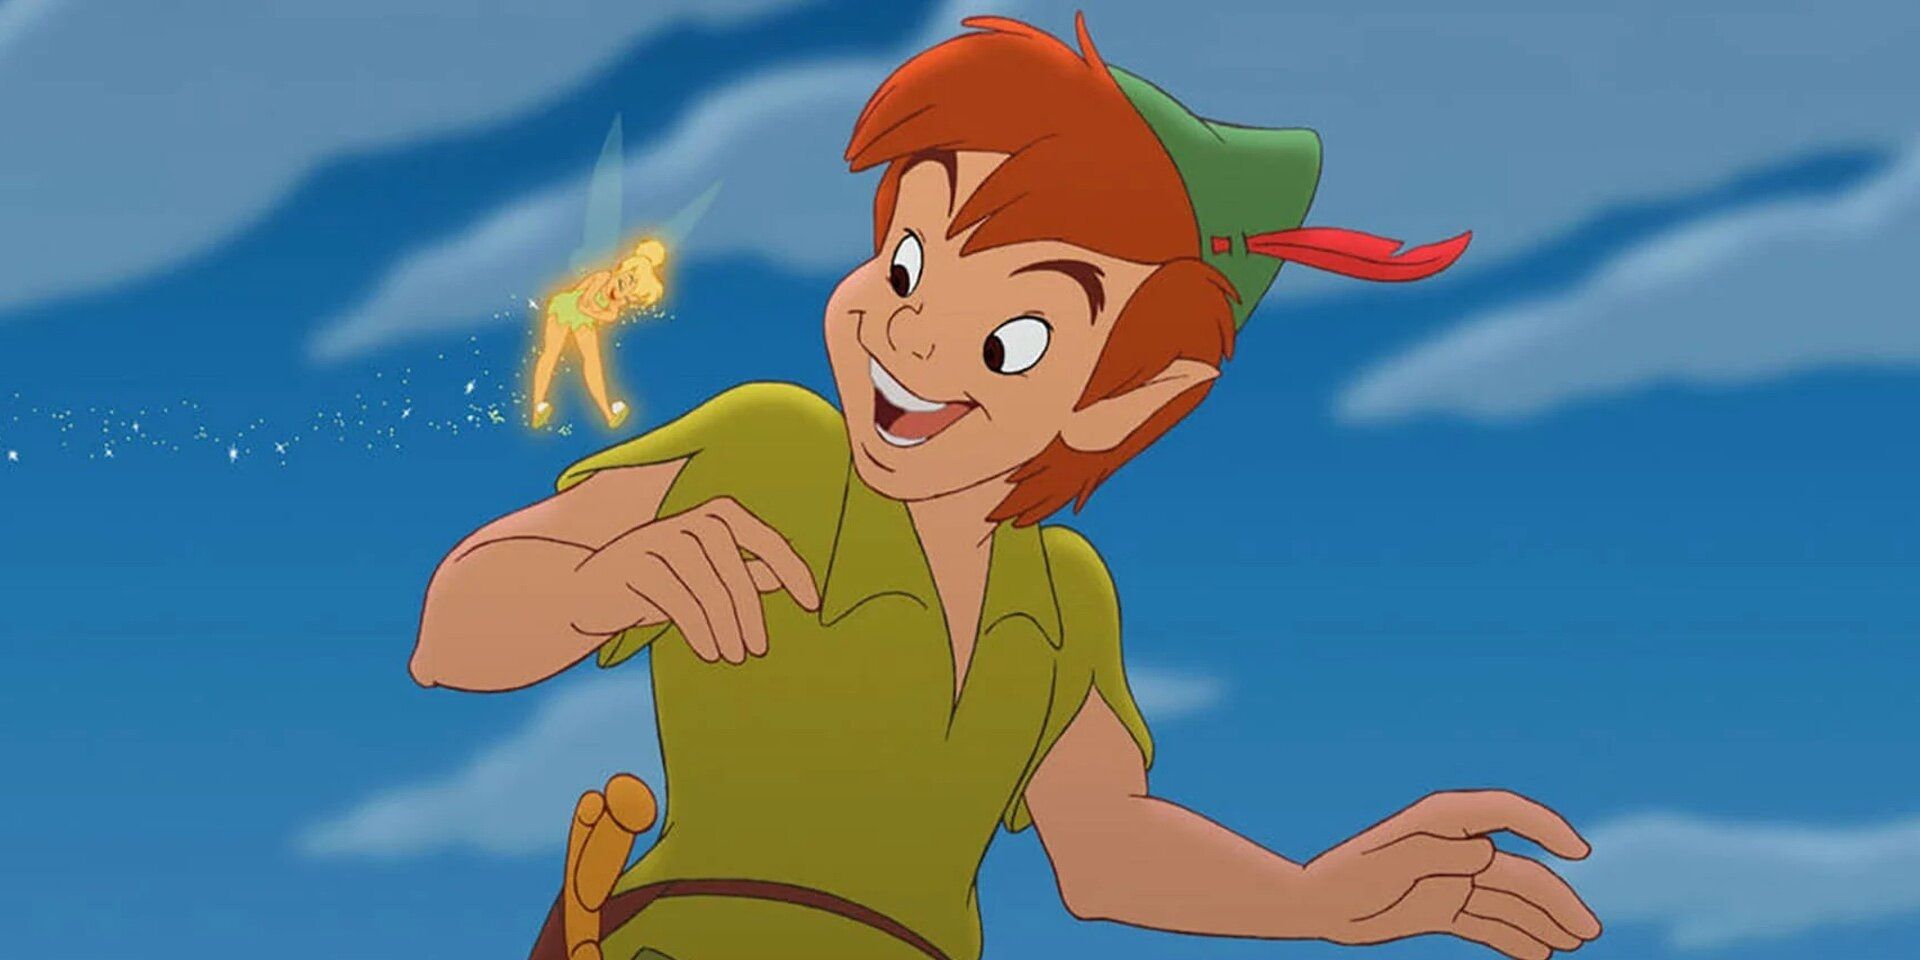 Disney 10 Characters Who Deserve Their Own Animated Series